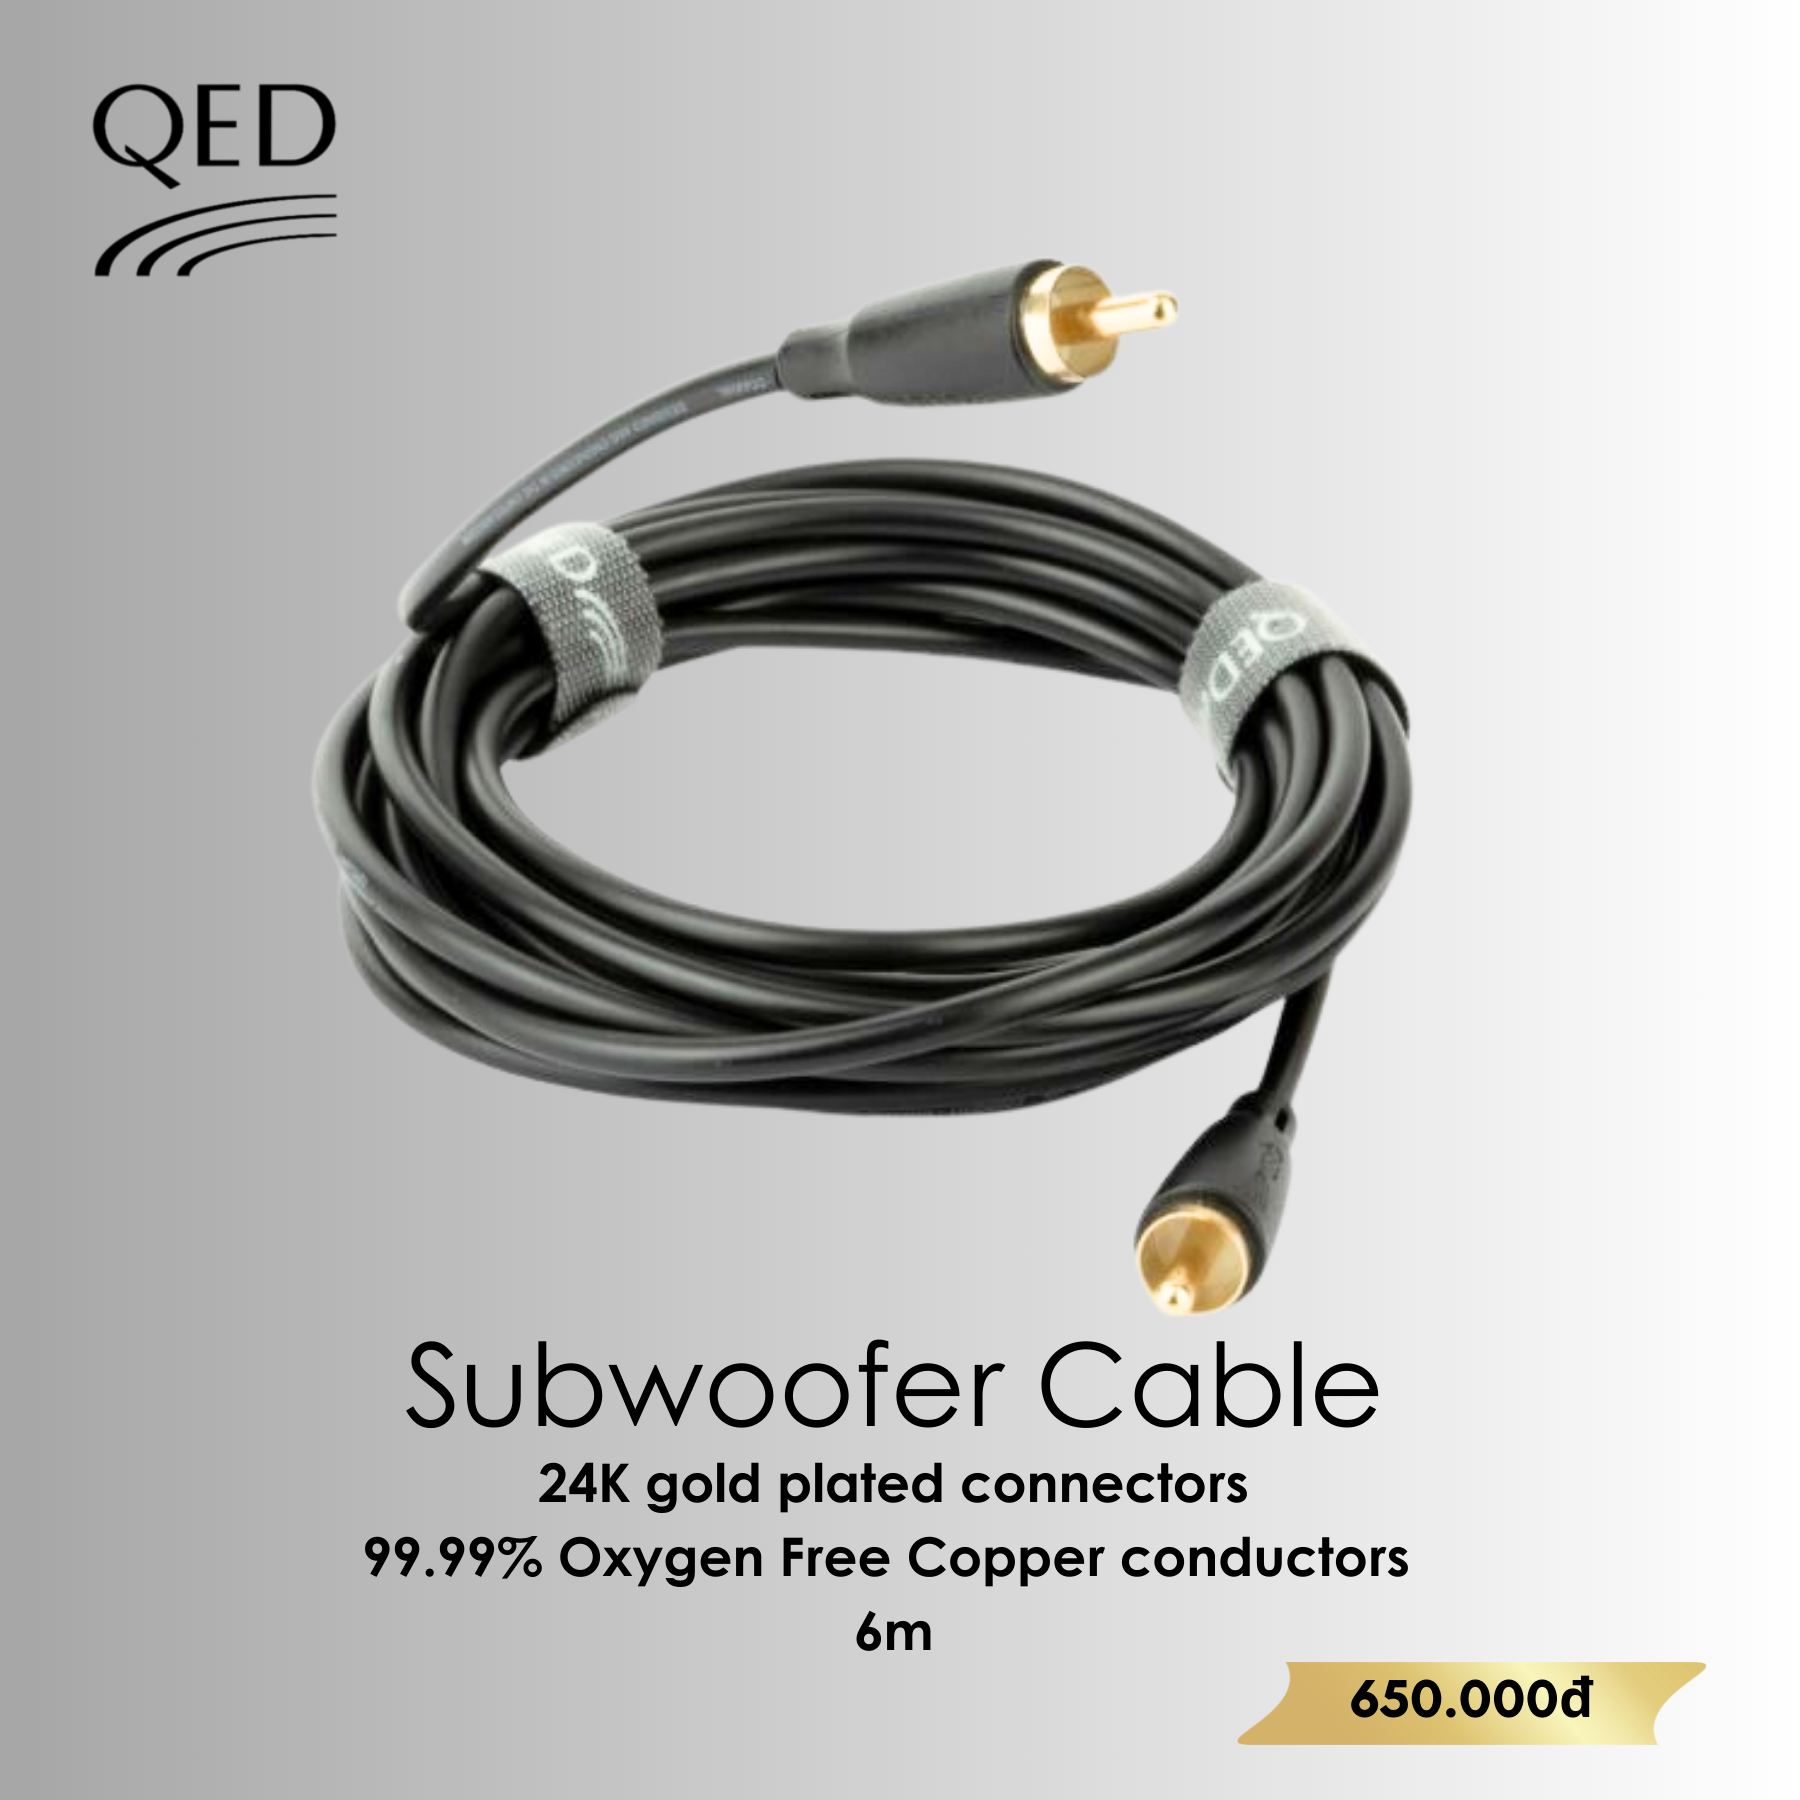 CONNECT Subwoofer Cable